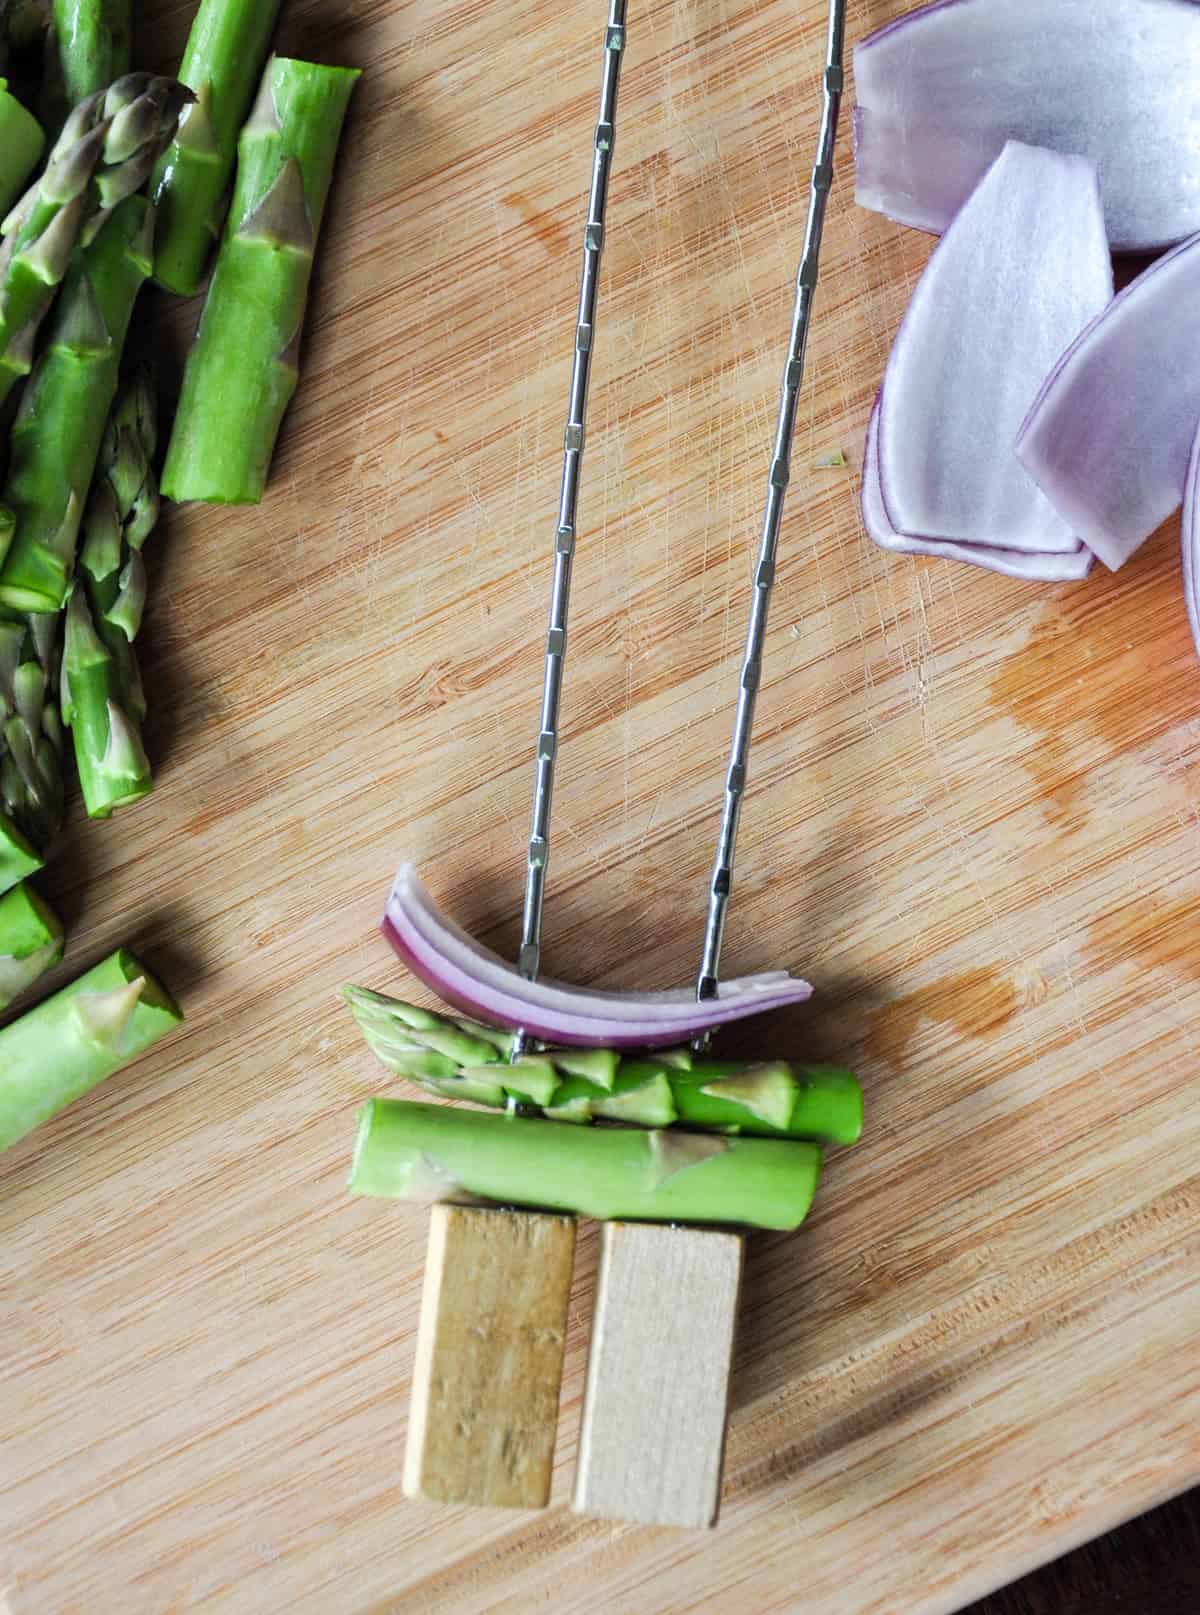 Onion and asparagus on skewer